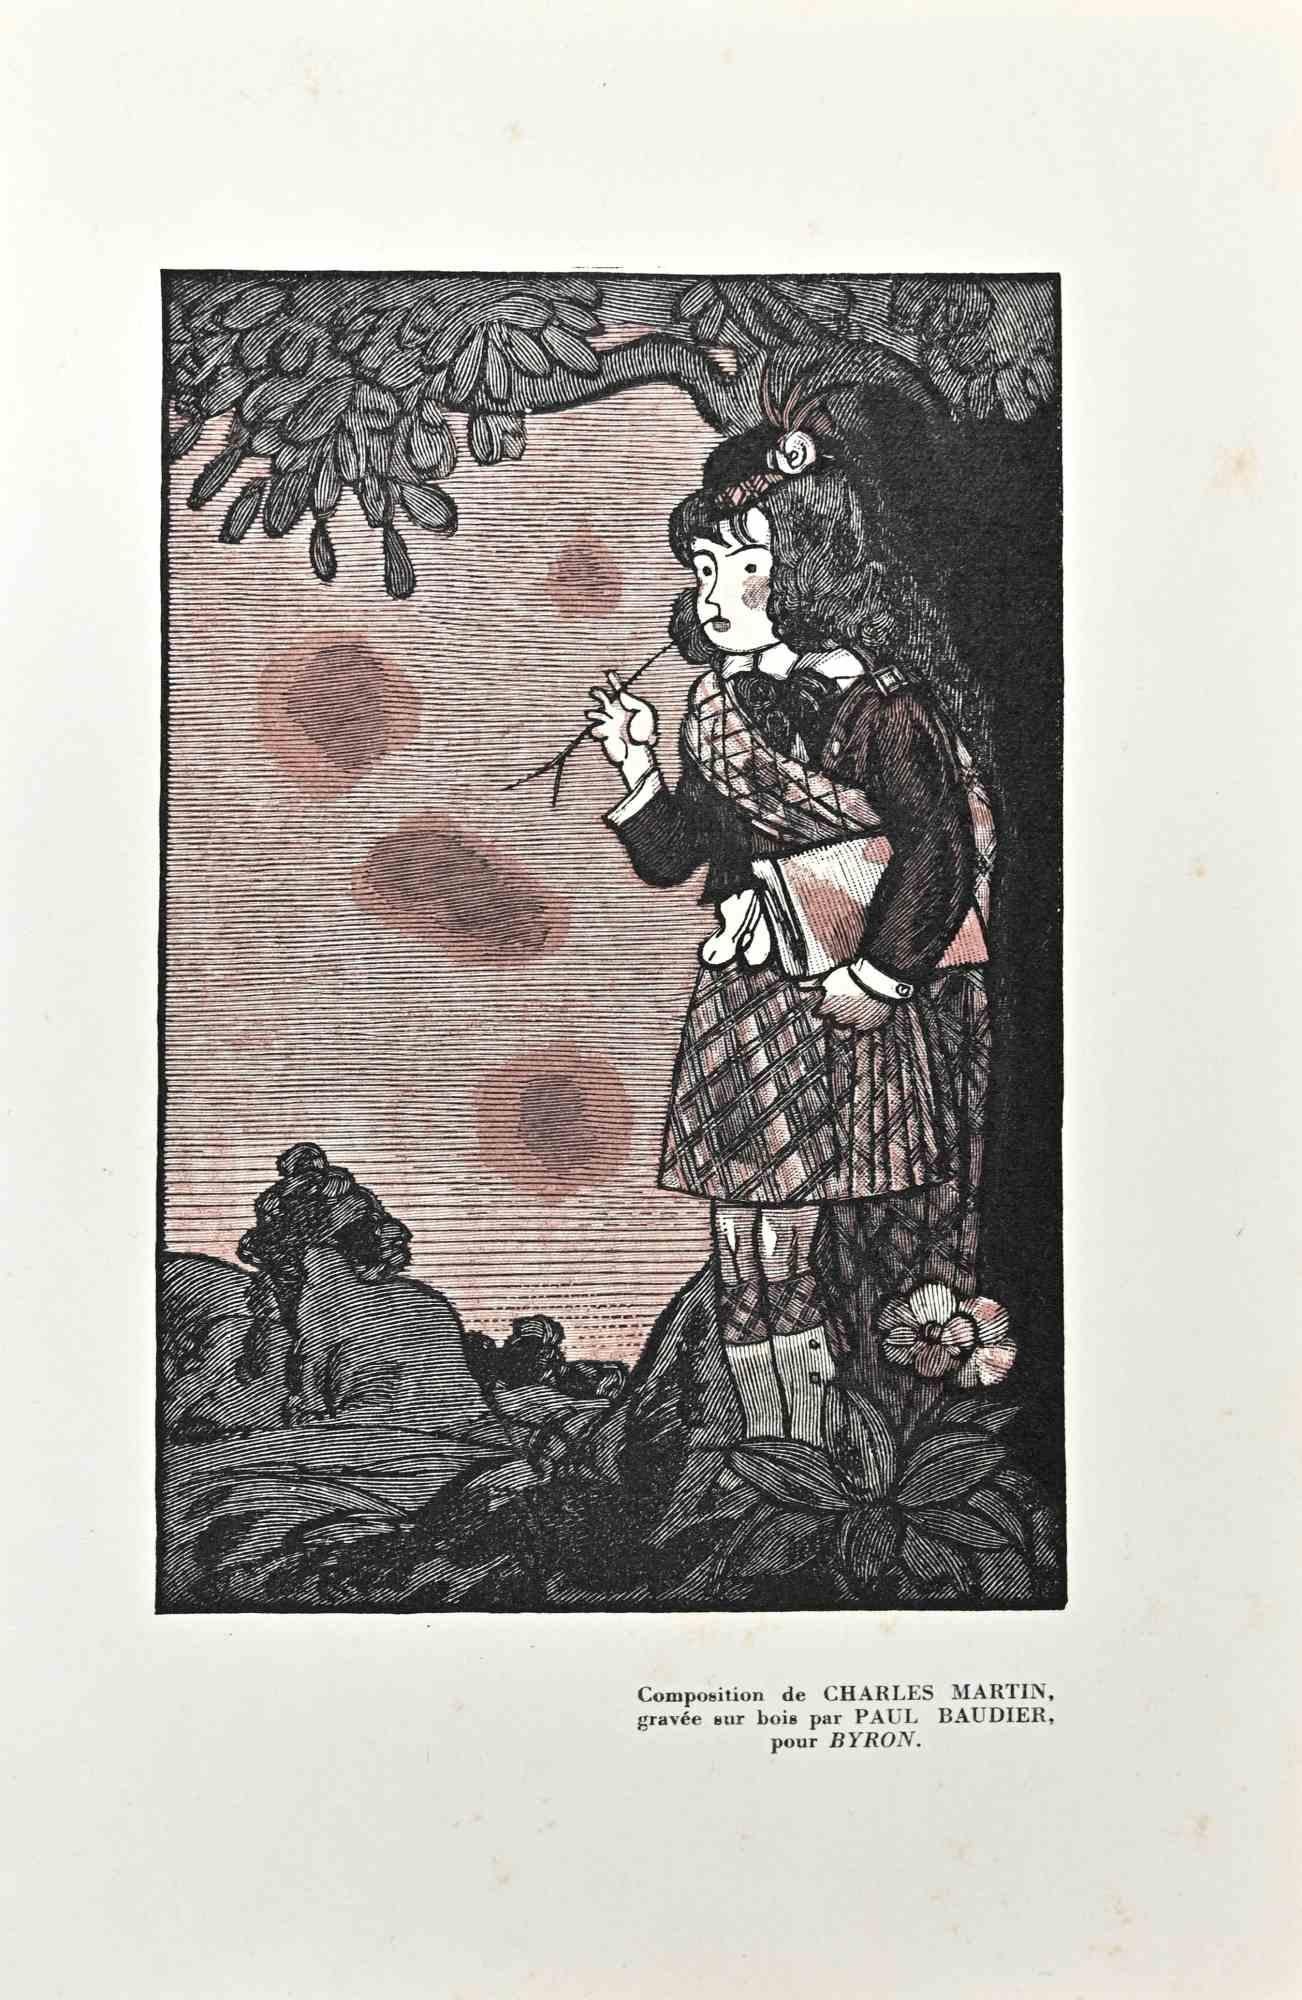 The Girl in Forest - Original Woodcut Print by Paul Baudier - 1930s